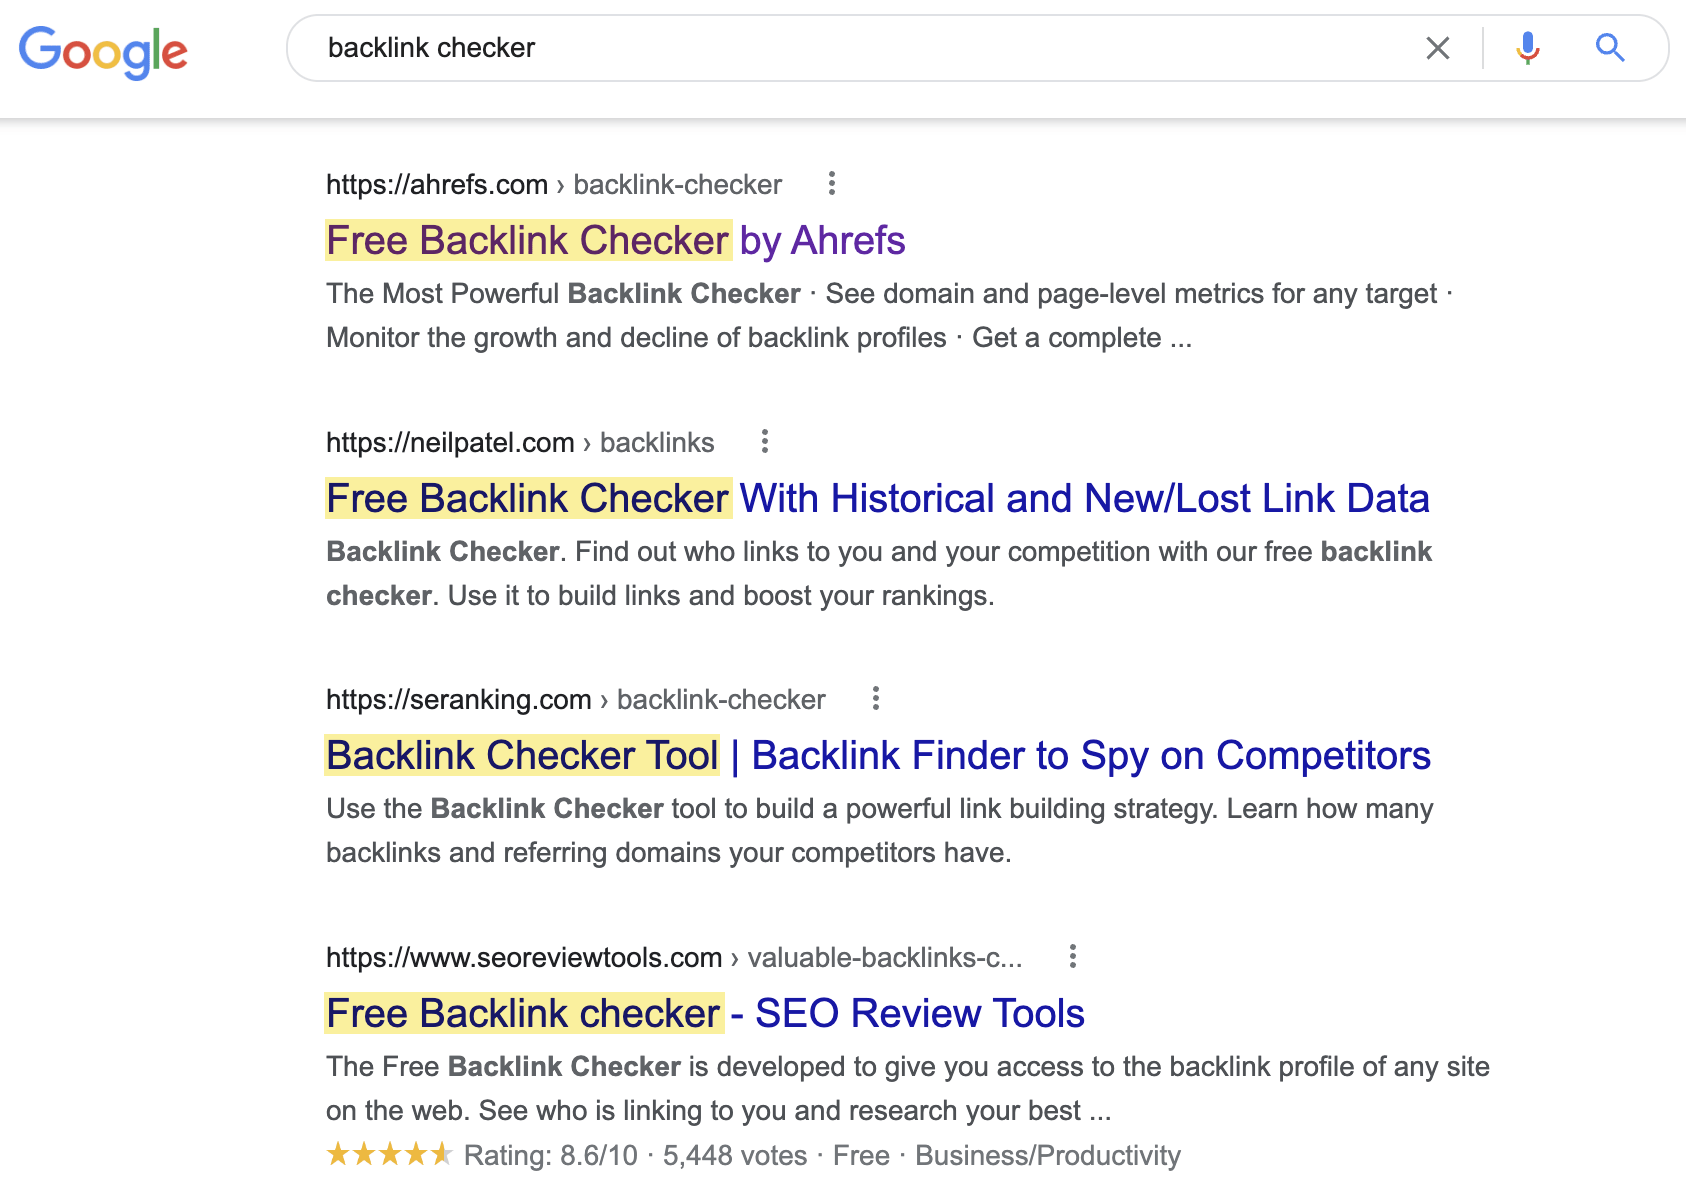 People searching for "backlink checker" are looking for a free tool
